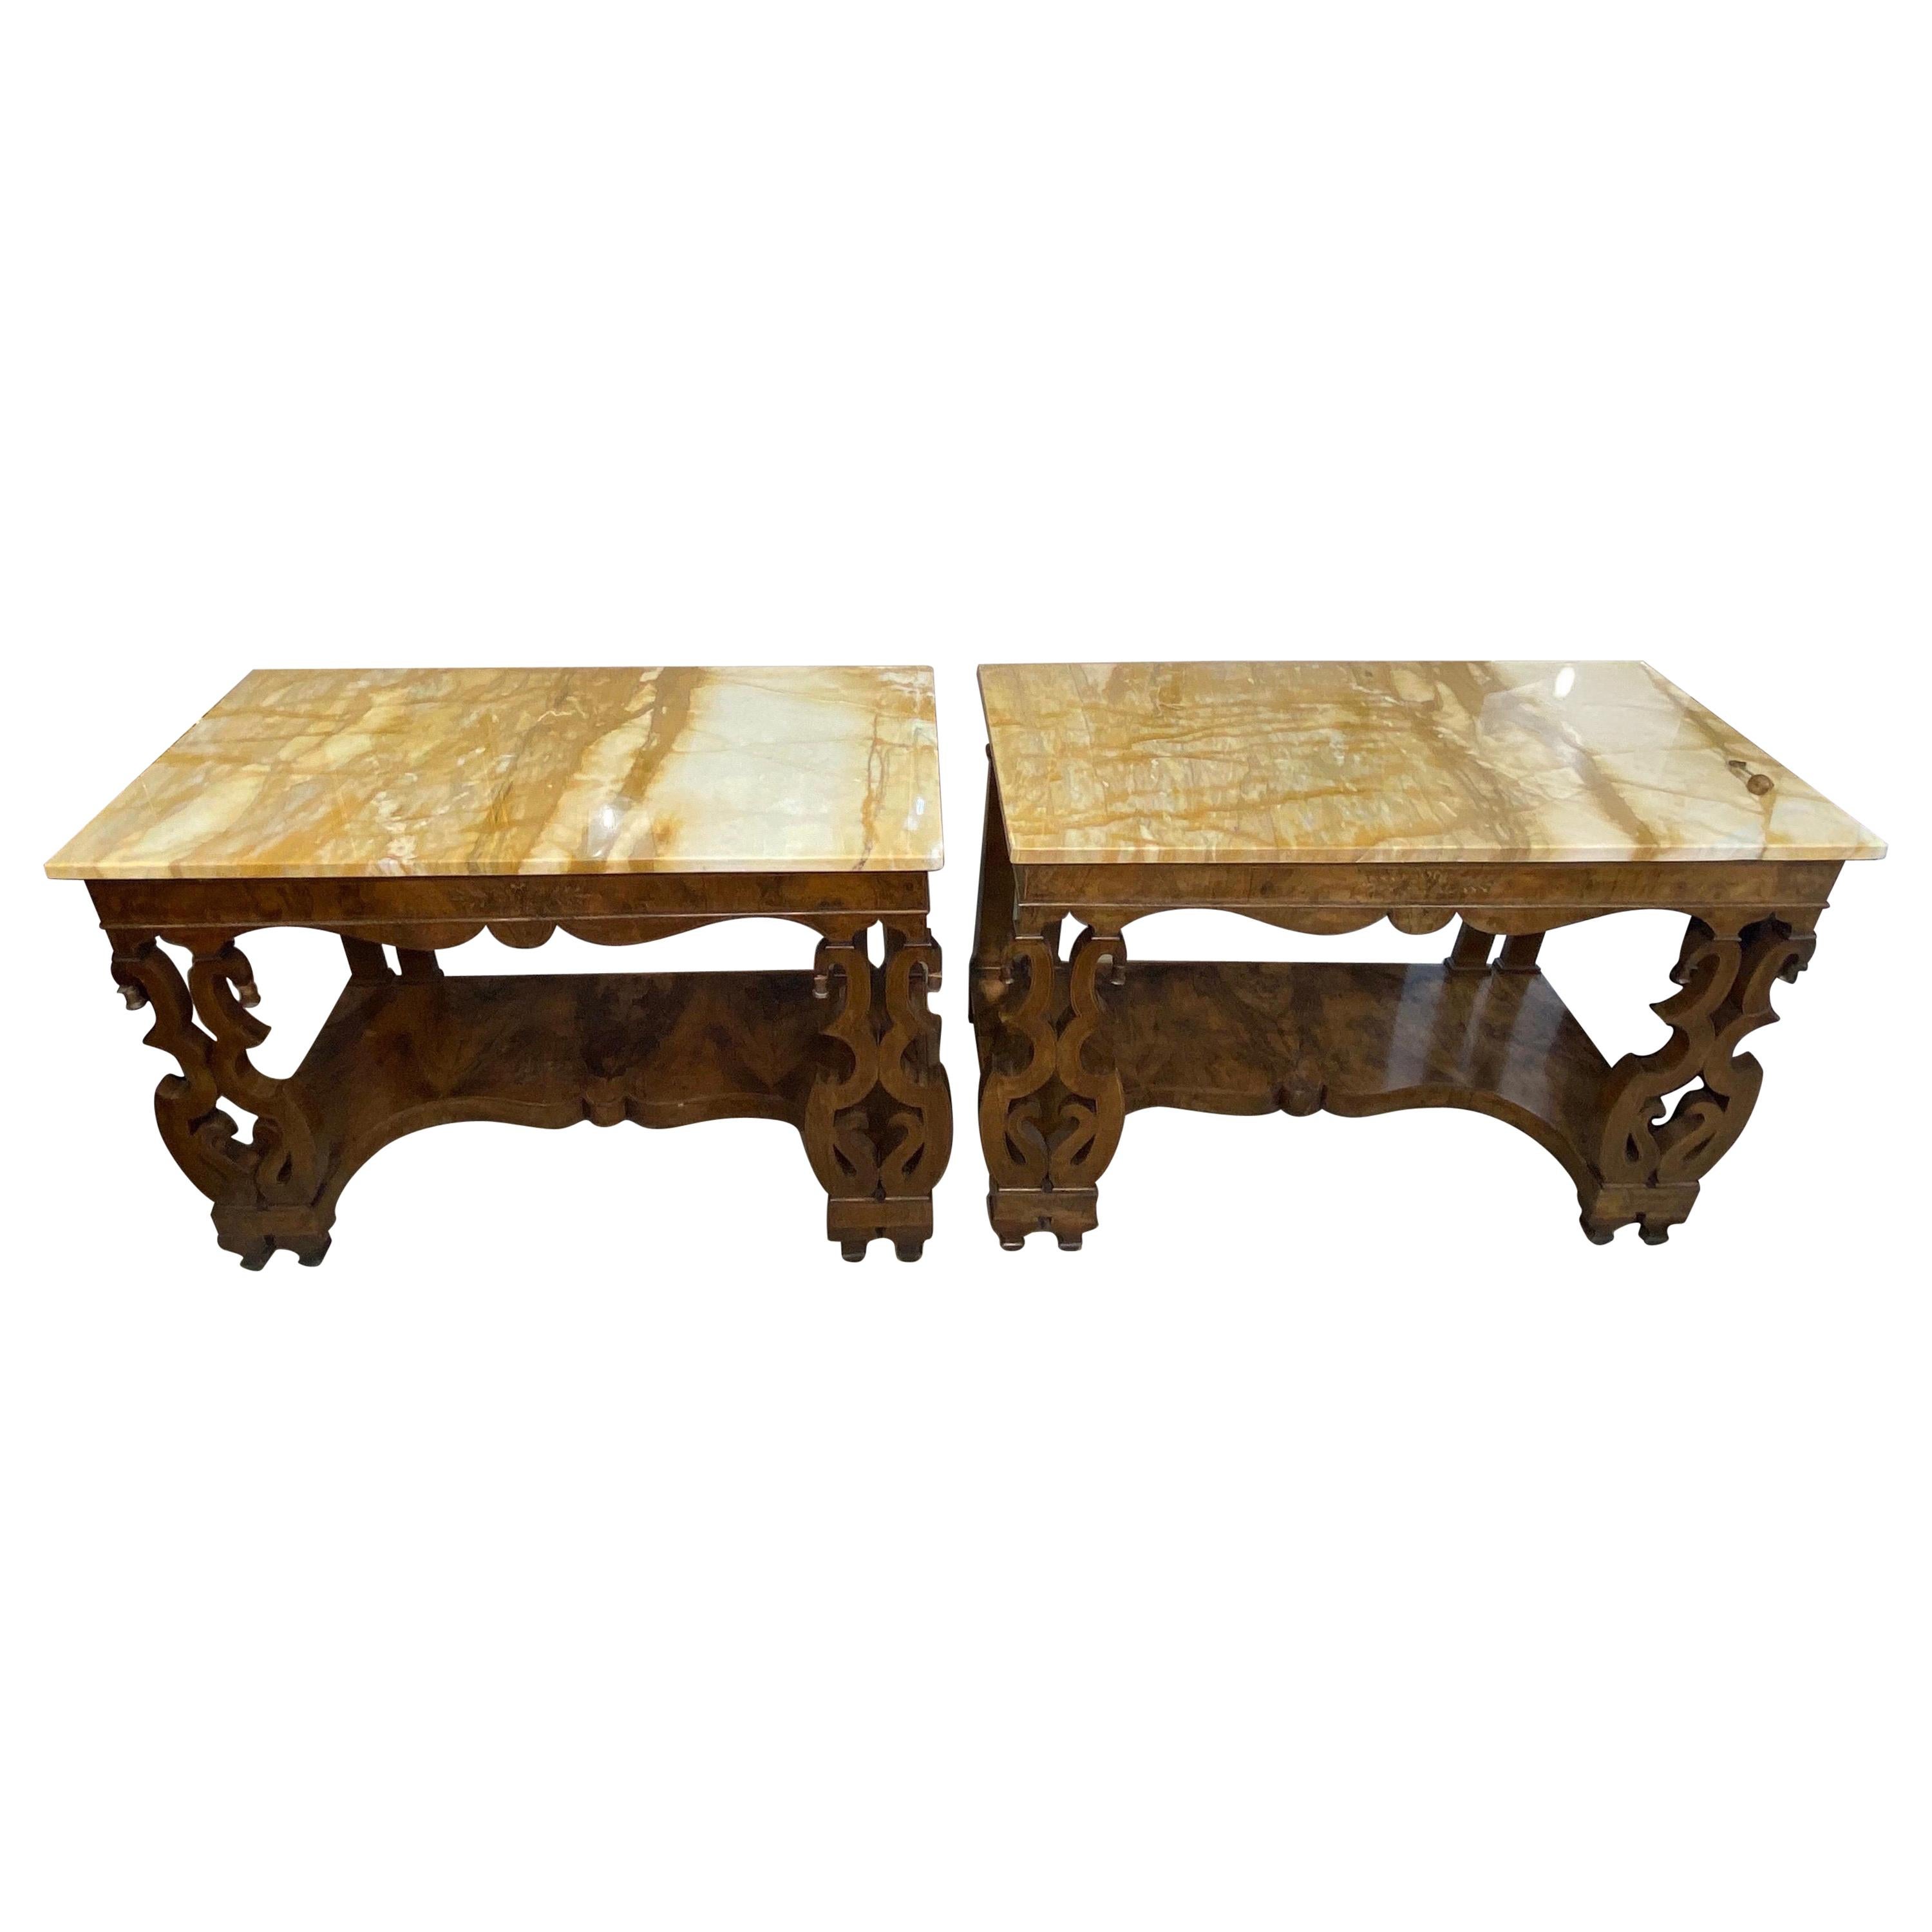 Pair of 19th Century Continental Inlaid Walnut Consoles with Yellow Onyx Tops